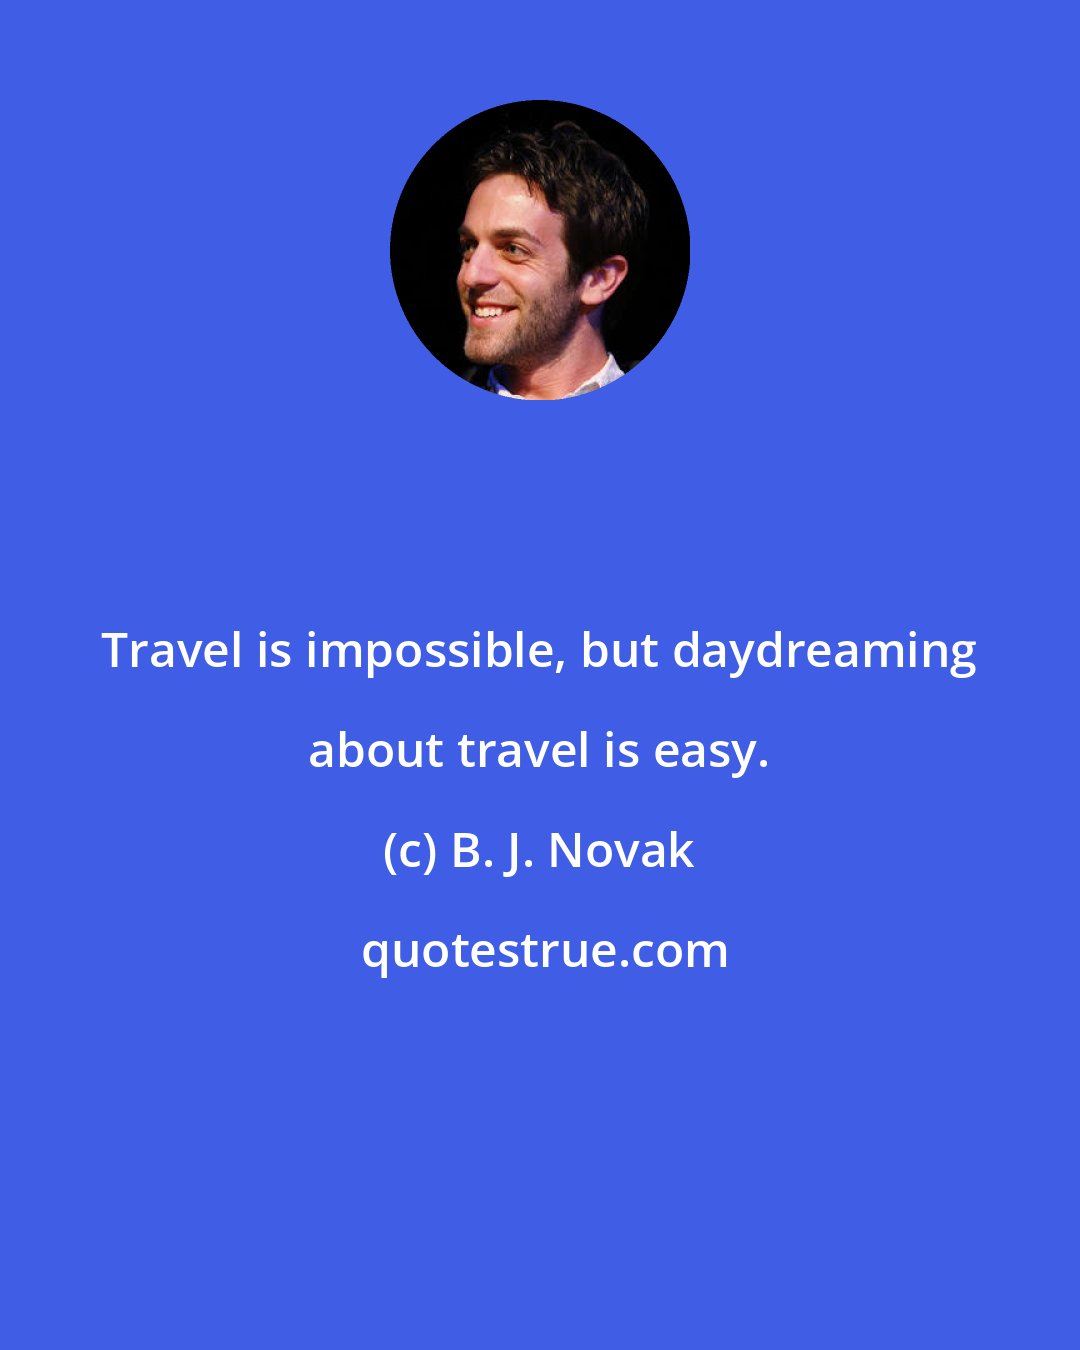 B. J. Novak: Travel is impossible, but daydreaming about travel is easy.